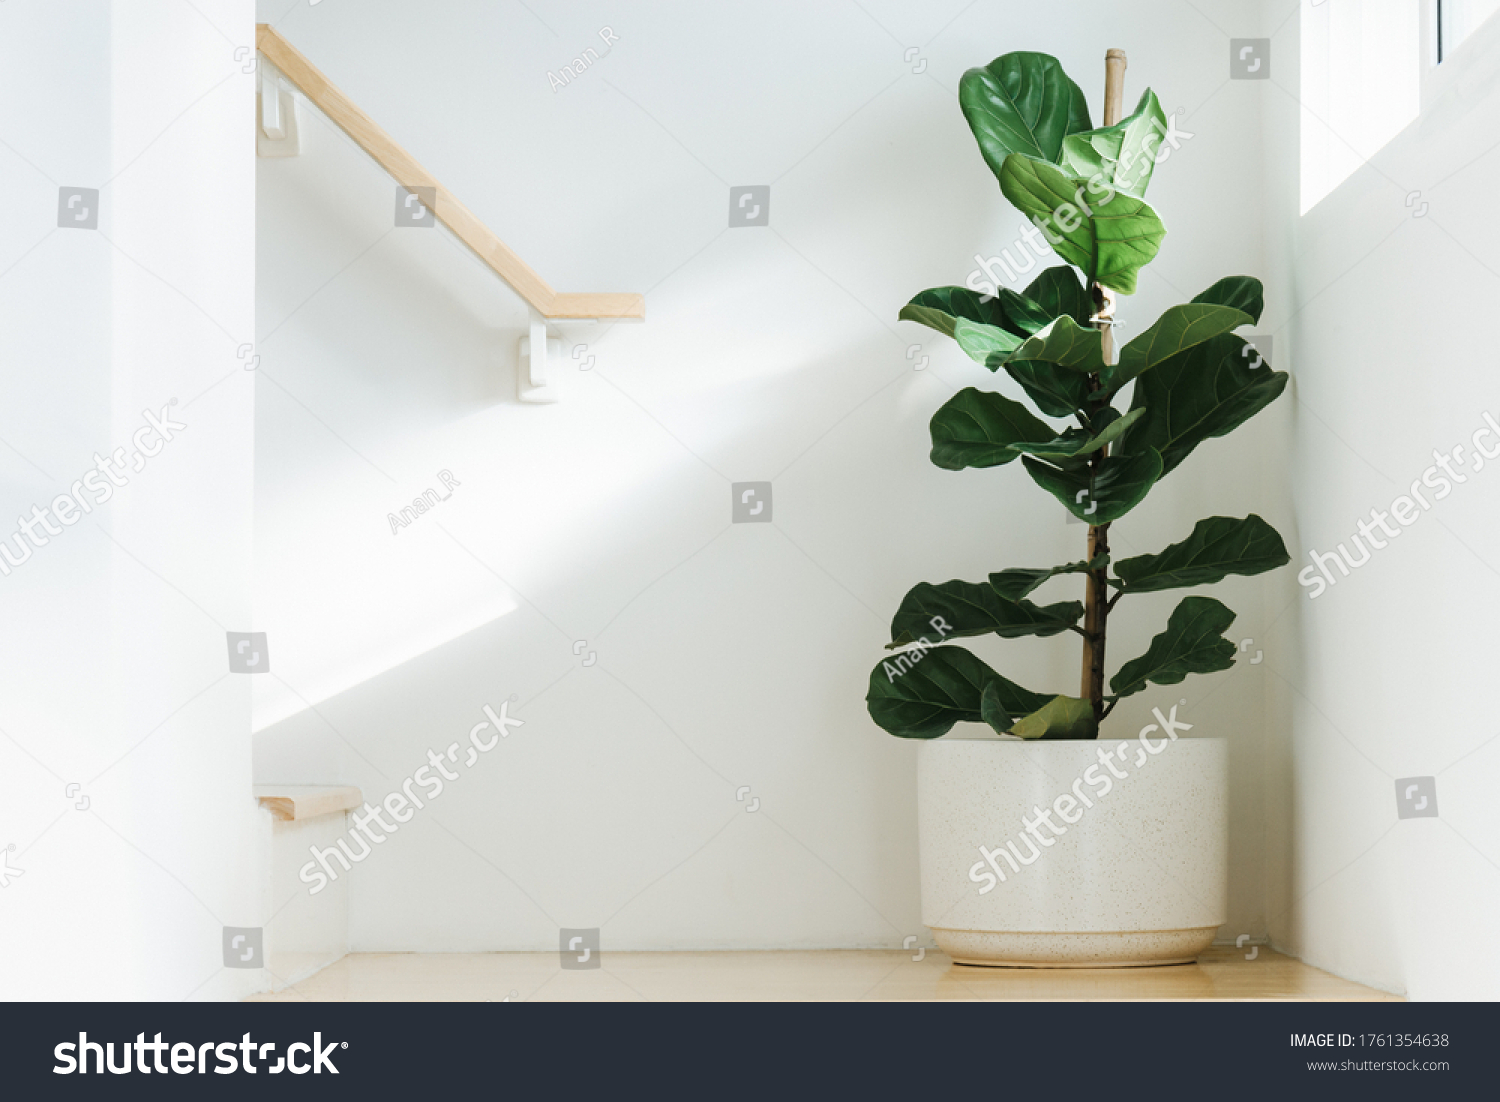 Fiddle leaf fig, Ficus lyrata, plant in circle white pot and place at the Corner of stair or ladder for decorate home or room. And there is sunlight coming from the right hand window. #1761354638